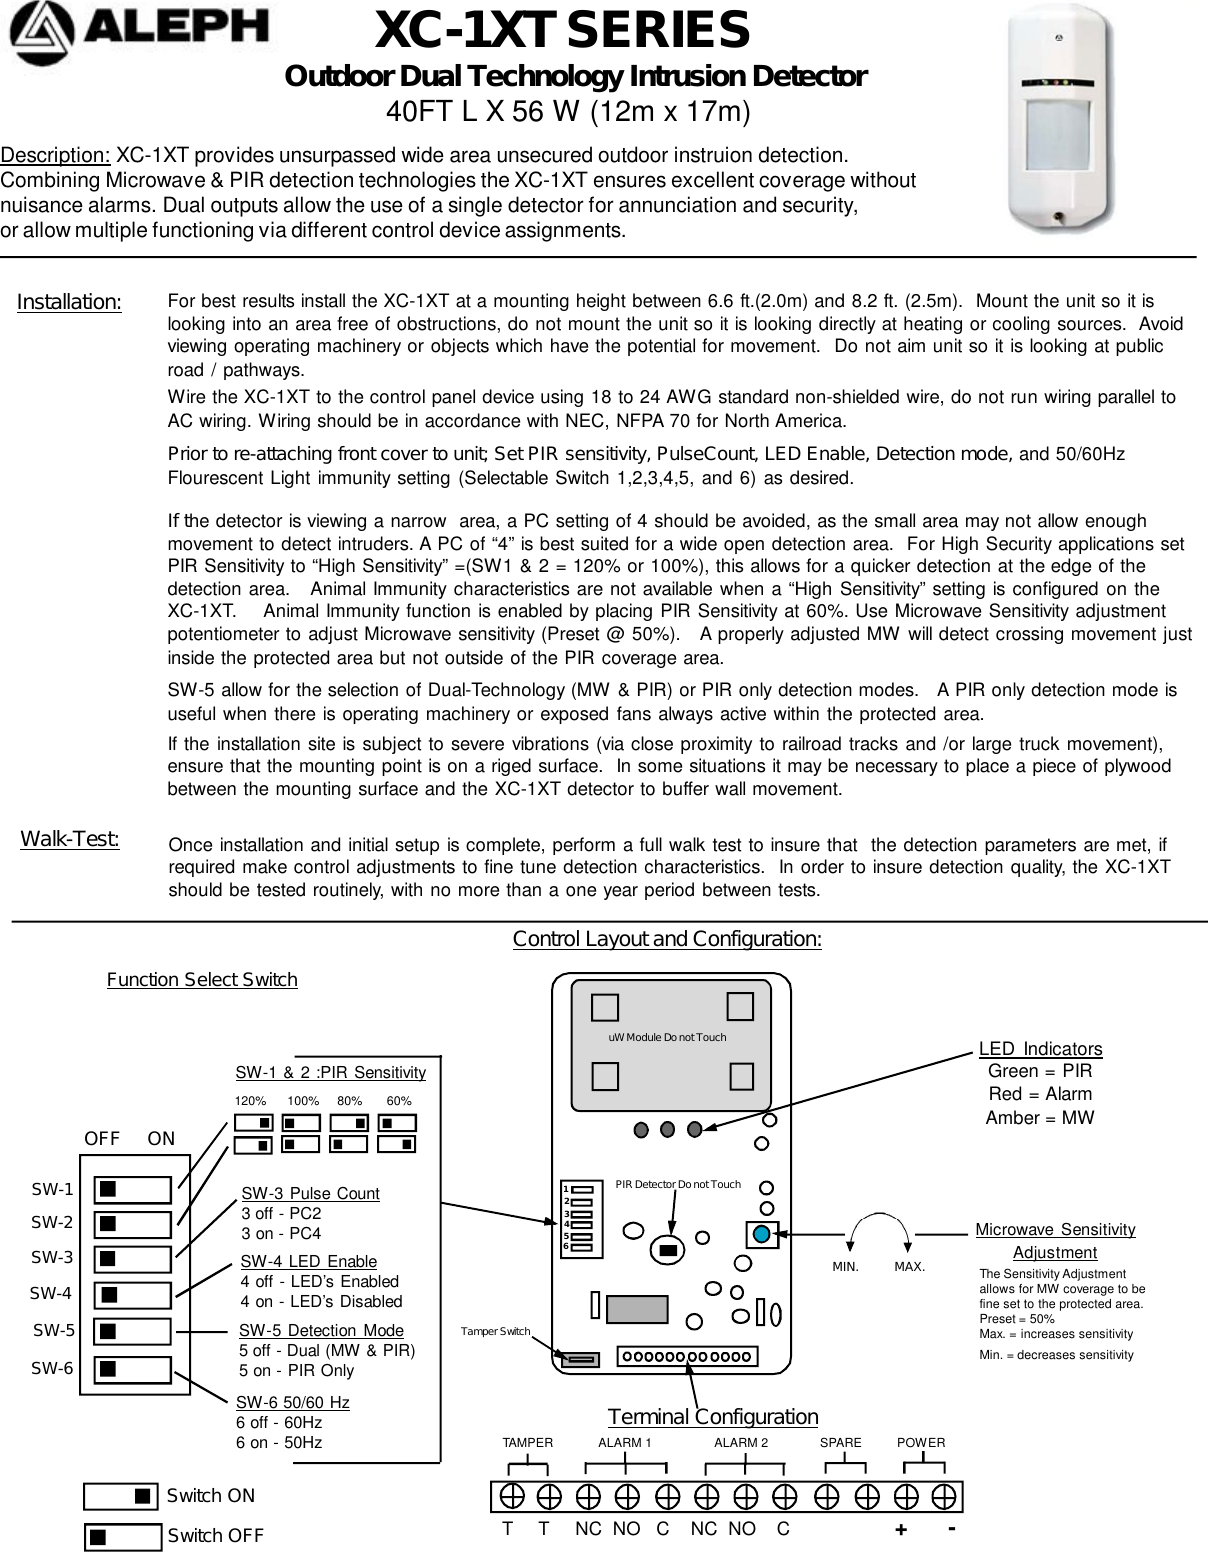 XC-1XT SERIESDescription: XC-1XT provides unsurpassed wide area unsecured outdoor instruion detection.Combining Microwave &amp; PIR detection technologies the XC-1XT ensures excellent coverage withoutnuisance alarms. Dual outputs allow the use of a single detector for annunciation and security,or allow multiple functioning via different control device assignments. Outdoor Dual Technology Intrusion Detector             40FT L X 56 W (12m x 17m)For best results install the XC-1XT at a mounting height between 6.6 ft.(2.0m) and 8.2 ft. (2.5m).  Mount the unit so it islooking into an area free of obstructions, do not mount the unit so it is looking directly at heating or cooling sources.  Avoidviewing operating machinery or objects which have the potential for movement.  Do not aim unit so it is looking at publicroad / pathways.Installation:Function Select SwitchPrior to re-attaching front cover to unit; Set PIR sensitivity, PulseCount, LED Enable, Detection mode, and 50/60HzFlourescent Light immunity setting (Selectable Switch 1,2,3,4,5, and 6) as desired.If the detector is viewing a narrow  area, a PC setting of 4 should be avoided, as the small area may not allow enoughmovement to detect intruders. A PC of “4” is best suited for a wide open detection area.  For High Security applications setPIR Sensitivity to “High Sensitivity” =(SW1 &amp; 2 = 120% or 100%), this allows for a quicker detection at the edge of thedetection area.   Animal Immunity characteristics are not available when a “High  Sensitivity” setting is configured on theXC-1XT.    Animal Immunity function is enabled by placing PIR Sensitivity at 60%. Use Microwave Sensitivity adjustmentpotentiometer to adjust Microwave sensitivity (Preset @ 50%).   A properly adjusted MW will detect crossing movement justinside the protected area but not outside of the PIR coverage area.SW-5 allow for the selection of Dual-Technology (MW &amp; PIR) or PIR only detection modes.   A PIR only detection mode isuseful when there is operating machinery or exposed fans always active within the protected area.If the installation site is subject to severe vibrations (via close proximity to railroad tracks and /or large truck movement),ensure that the mounting point is on a riged surface.  In some situations it may be necessary to place a piece of plywoodbetween the mounting surface and the XC-1XT detector to buffer wall movement.Walk-Test: Once installation and initial setup is complete, perform a full walk test to insure that  the detection parameters are met, ifrequired make control adjustments to fine tune detection characteristics.  In order to insure detection quality, the XC-1XTshould be tested routinely, with no more than a one year period between tests.Control Layout and Configuration:Terminal Configuration                    T     T     NC  NO   C    NC  NO    C                    +      -                             TAMPER             ALARM 1                  ALARM 2               SPARE          POWERLED IndicatorsGreen = PIRRed = AlarmAmber = MWSwitch ONWire the XC-1XT to the control panel device using 18 to 24 AWG standard non-shielded wire, do not run wiring parallel toAC wiring. Wiring should be in accordance with NEC, NFPA 70 for North America.SW-1 &amp; 2 :PIR SensitivitySwitch OFFSW-1SW-2SW-6SW-5SW-3SW-4SW-3 Pulse Count3 off - PC23 on - PC4SW-4 LED Enable4 off - LED’s Enabled4 on - LED’s DisabledSW-5 Detection Mode5 off - Dual (MW &amp; PIR)5 on - PIR OnlySW-6 50/60 Hz6 off - 60Hz6 on - 50HzMicrowave  SensitivityAdjustmentuW Module Do not TouchPIR Detector Do not TouchTamper Switch312645The Sensitivity Adjustmentallows for MW coverage to befine set to the protected area.Preset = 50%Max. = increases sensitivityMin. = decreases sensitivityOFF     ON120%      100%     80%       60%                      MIN.          MAX.